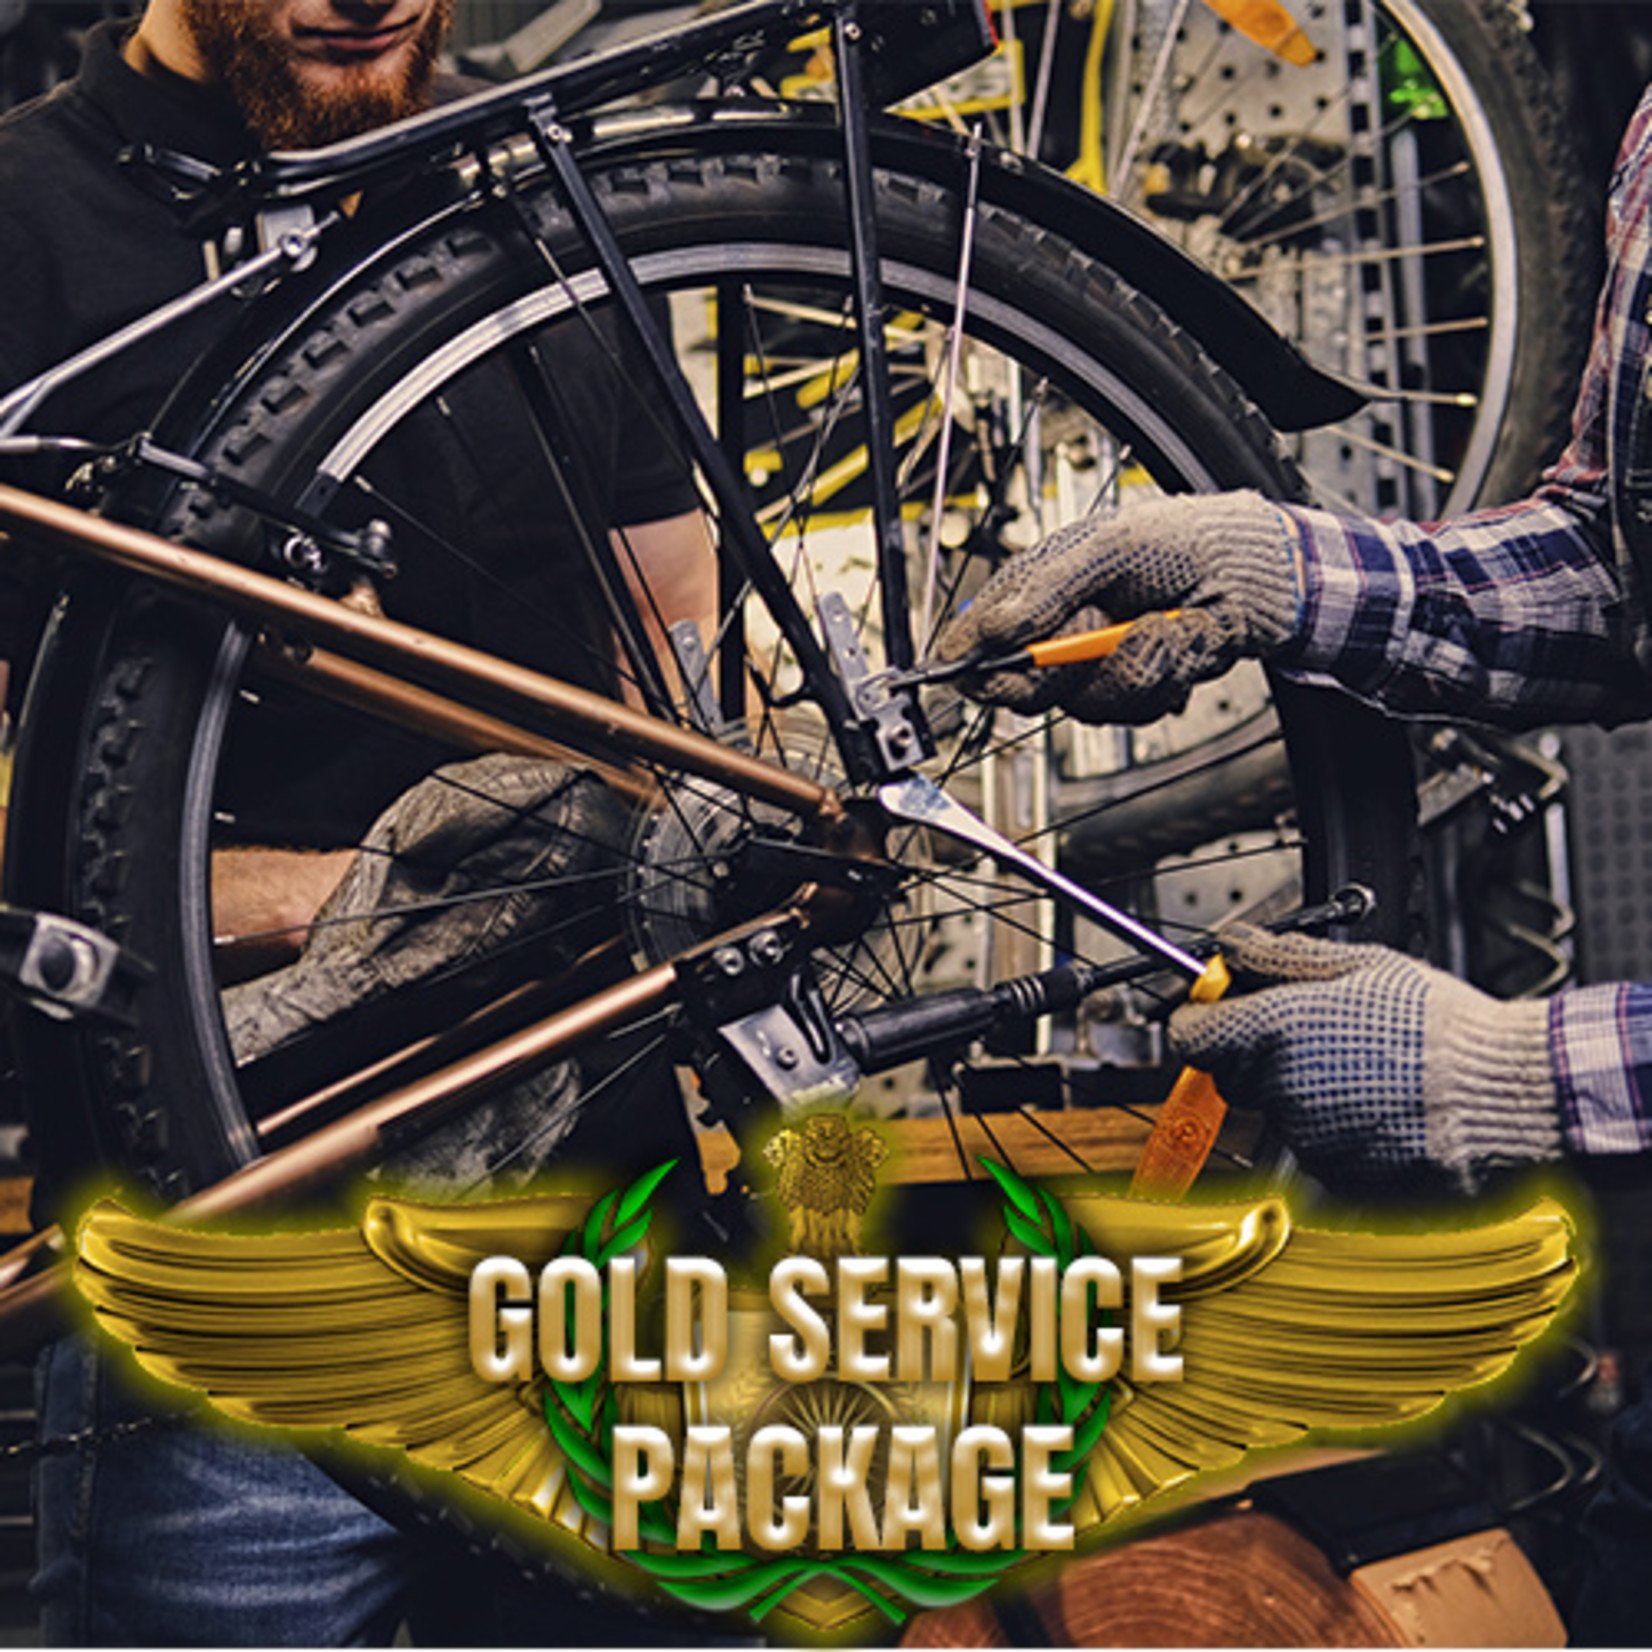 GOLD SERVICE PACKAGE